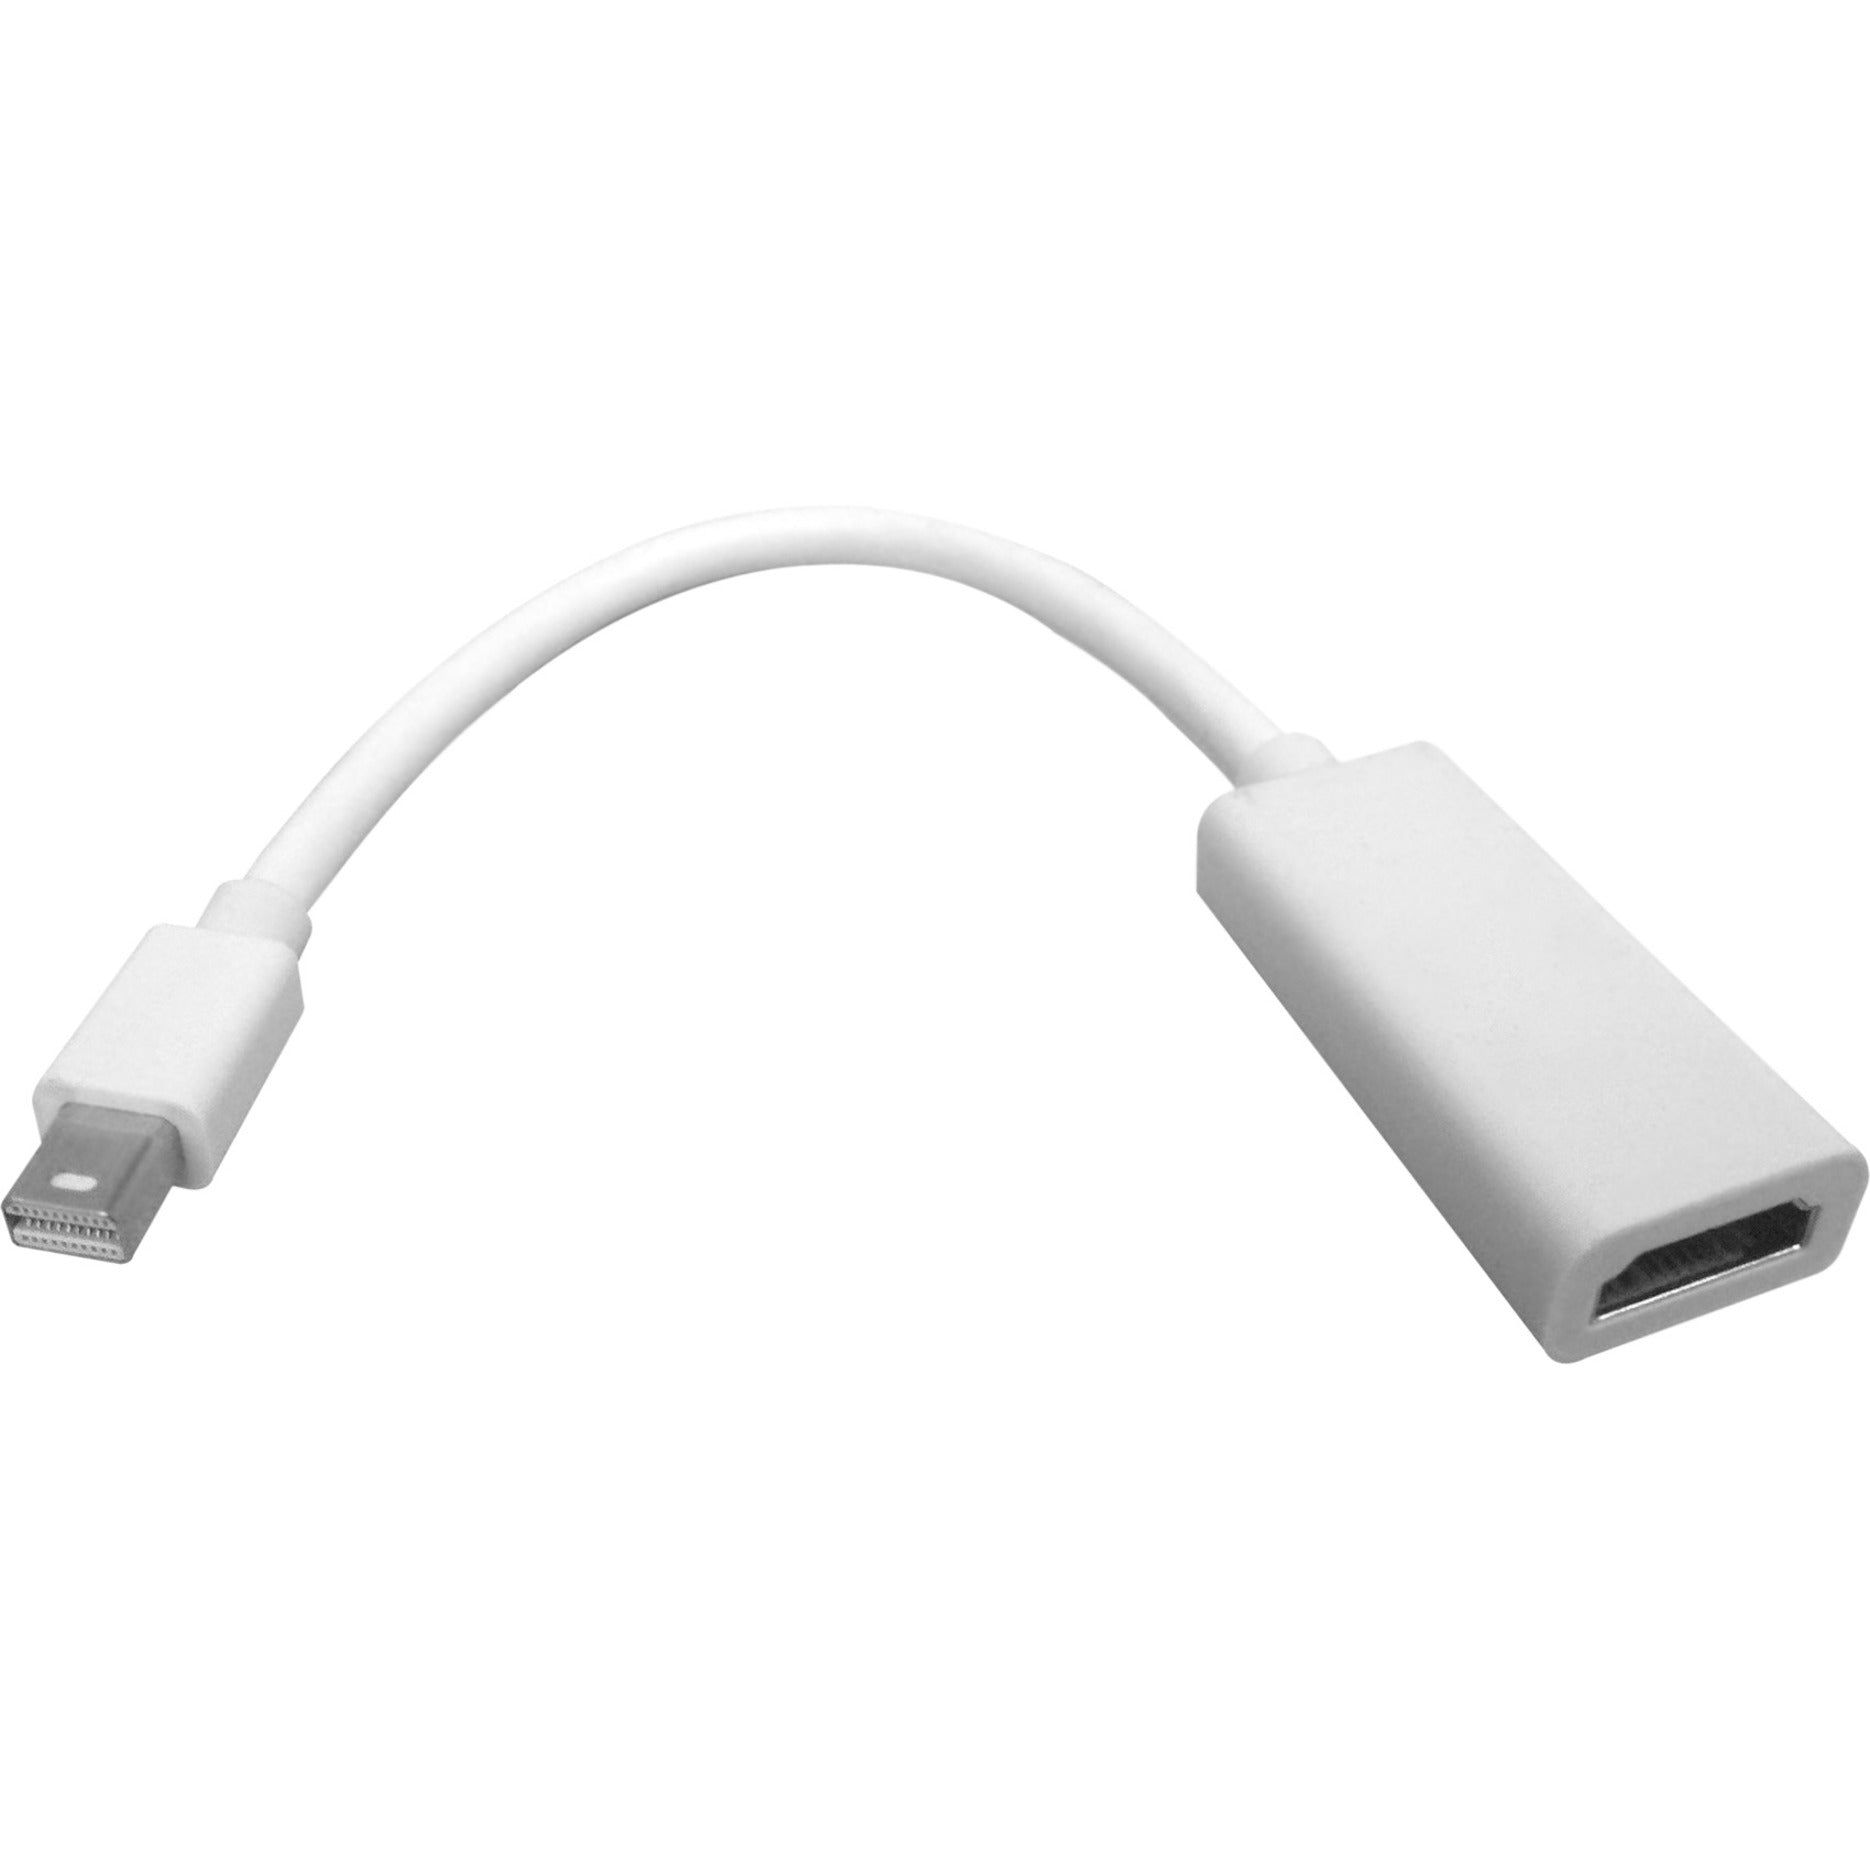 Comprehensive MDPM-HDF Mini DisplayPort Male to HDMI Female Adapter Cable, MFI Certified, 6.8 Gbit/s Data Transfer Rate, 1920 x 1200 Supported Resolution